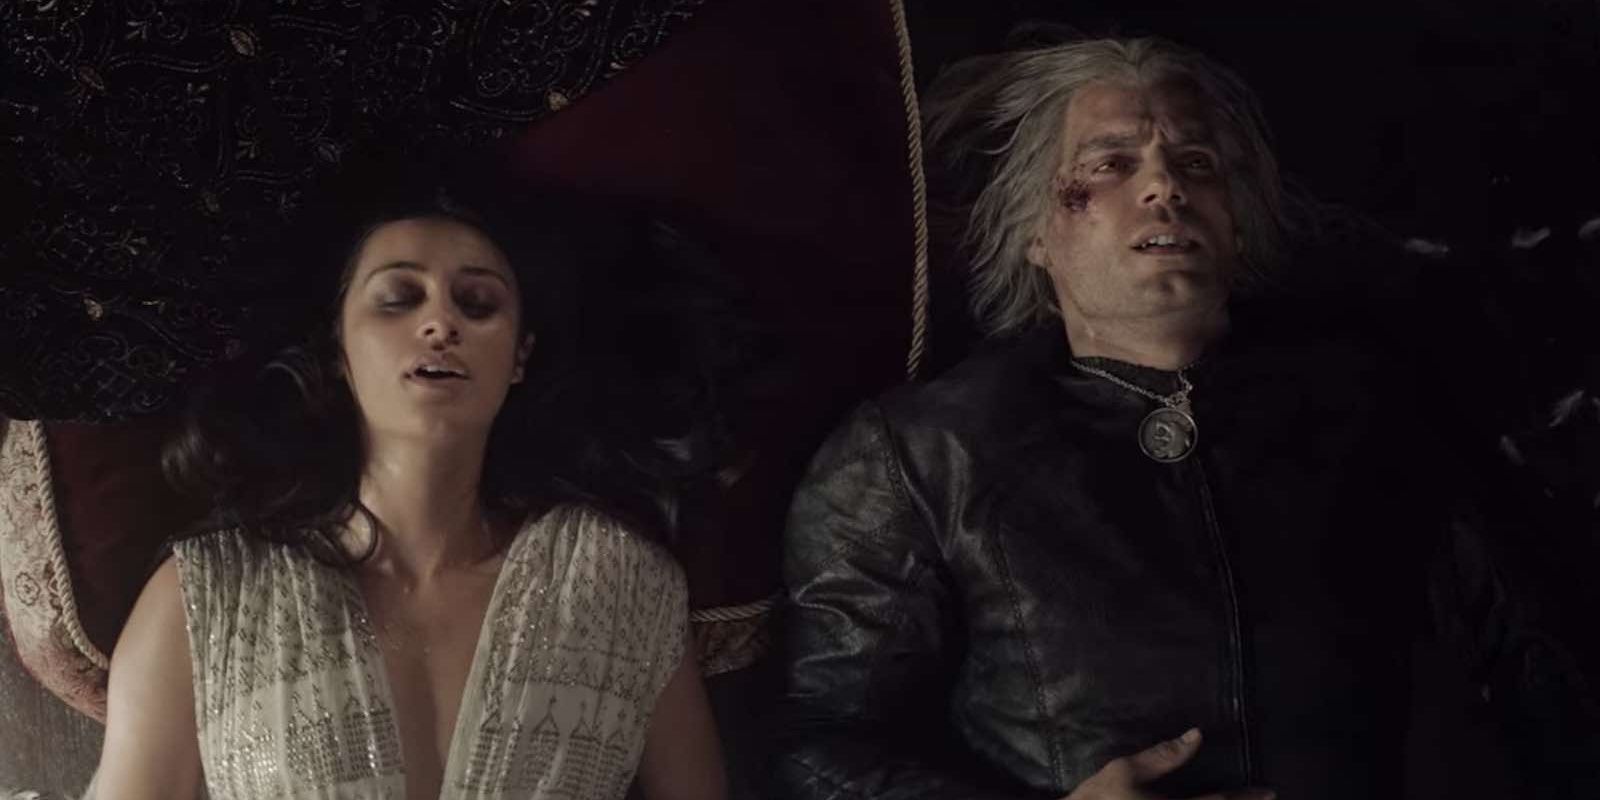 Geralt and Yennefer in The Witcher